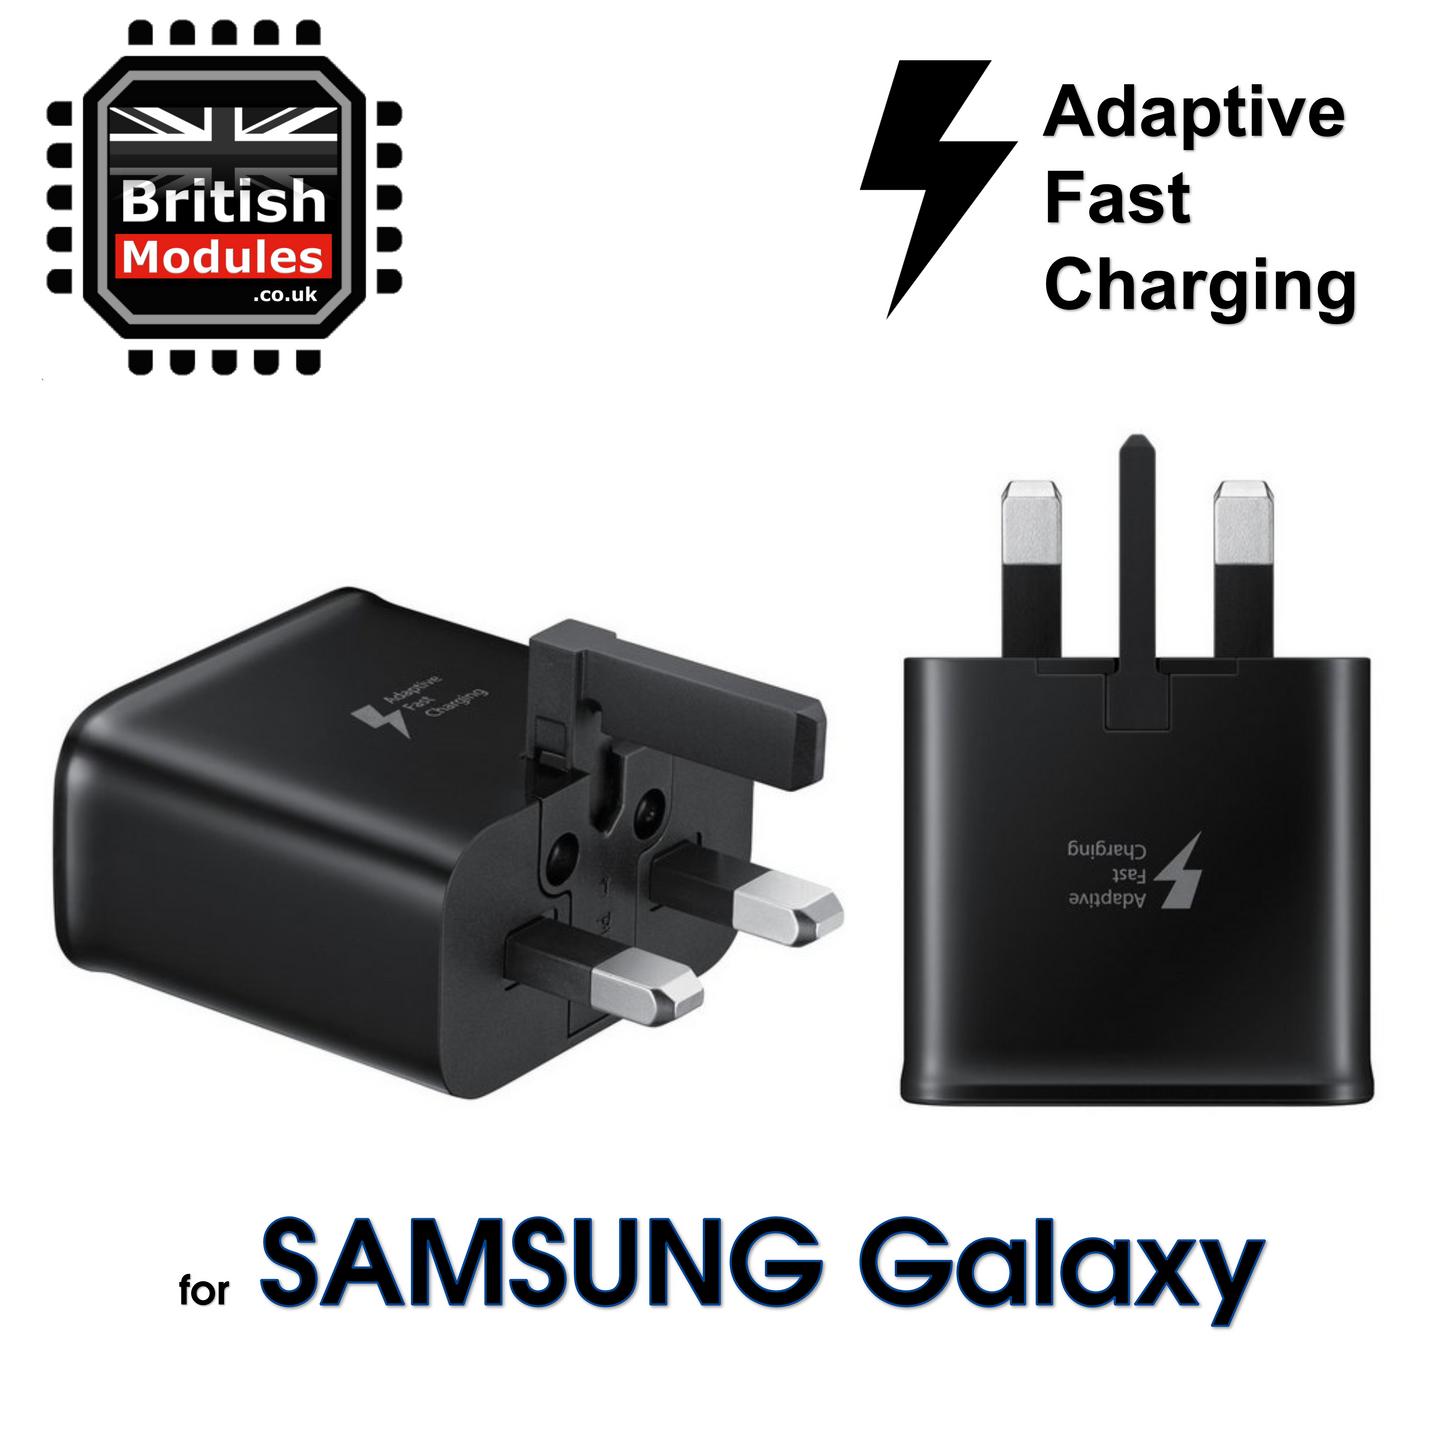 Samsung Galaxy S8 PLUS S9 S10+ Adaptive Fast Mains Charger Plug + Type C USB Cable